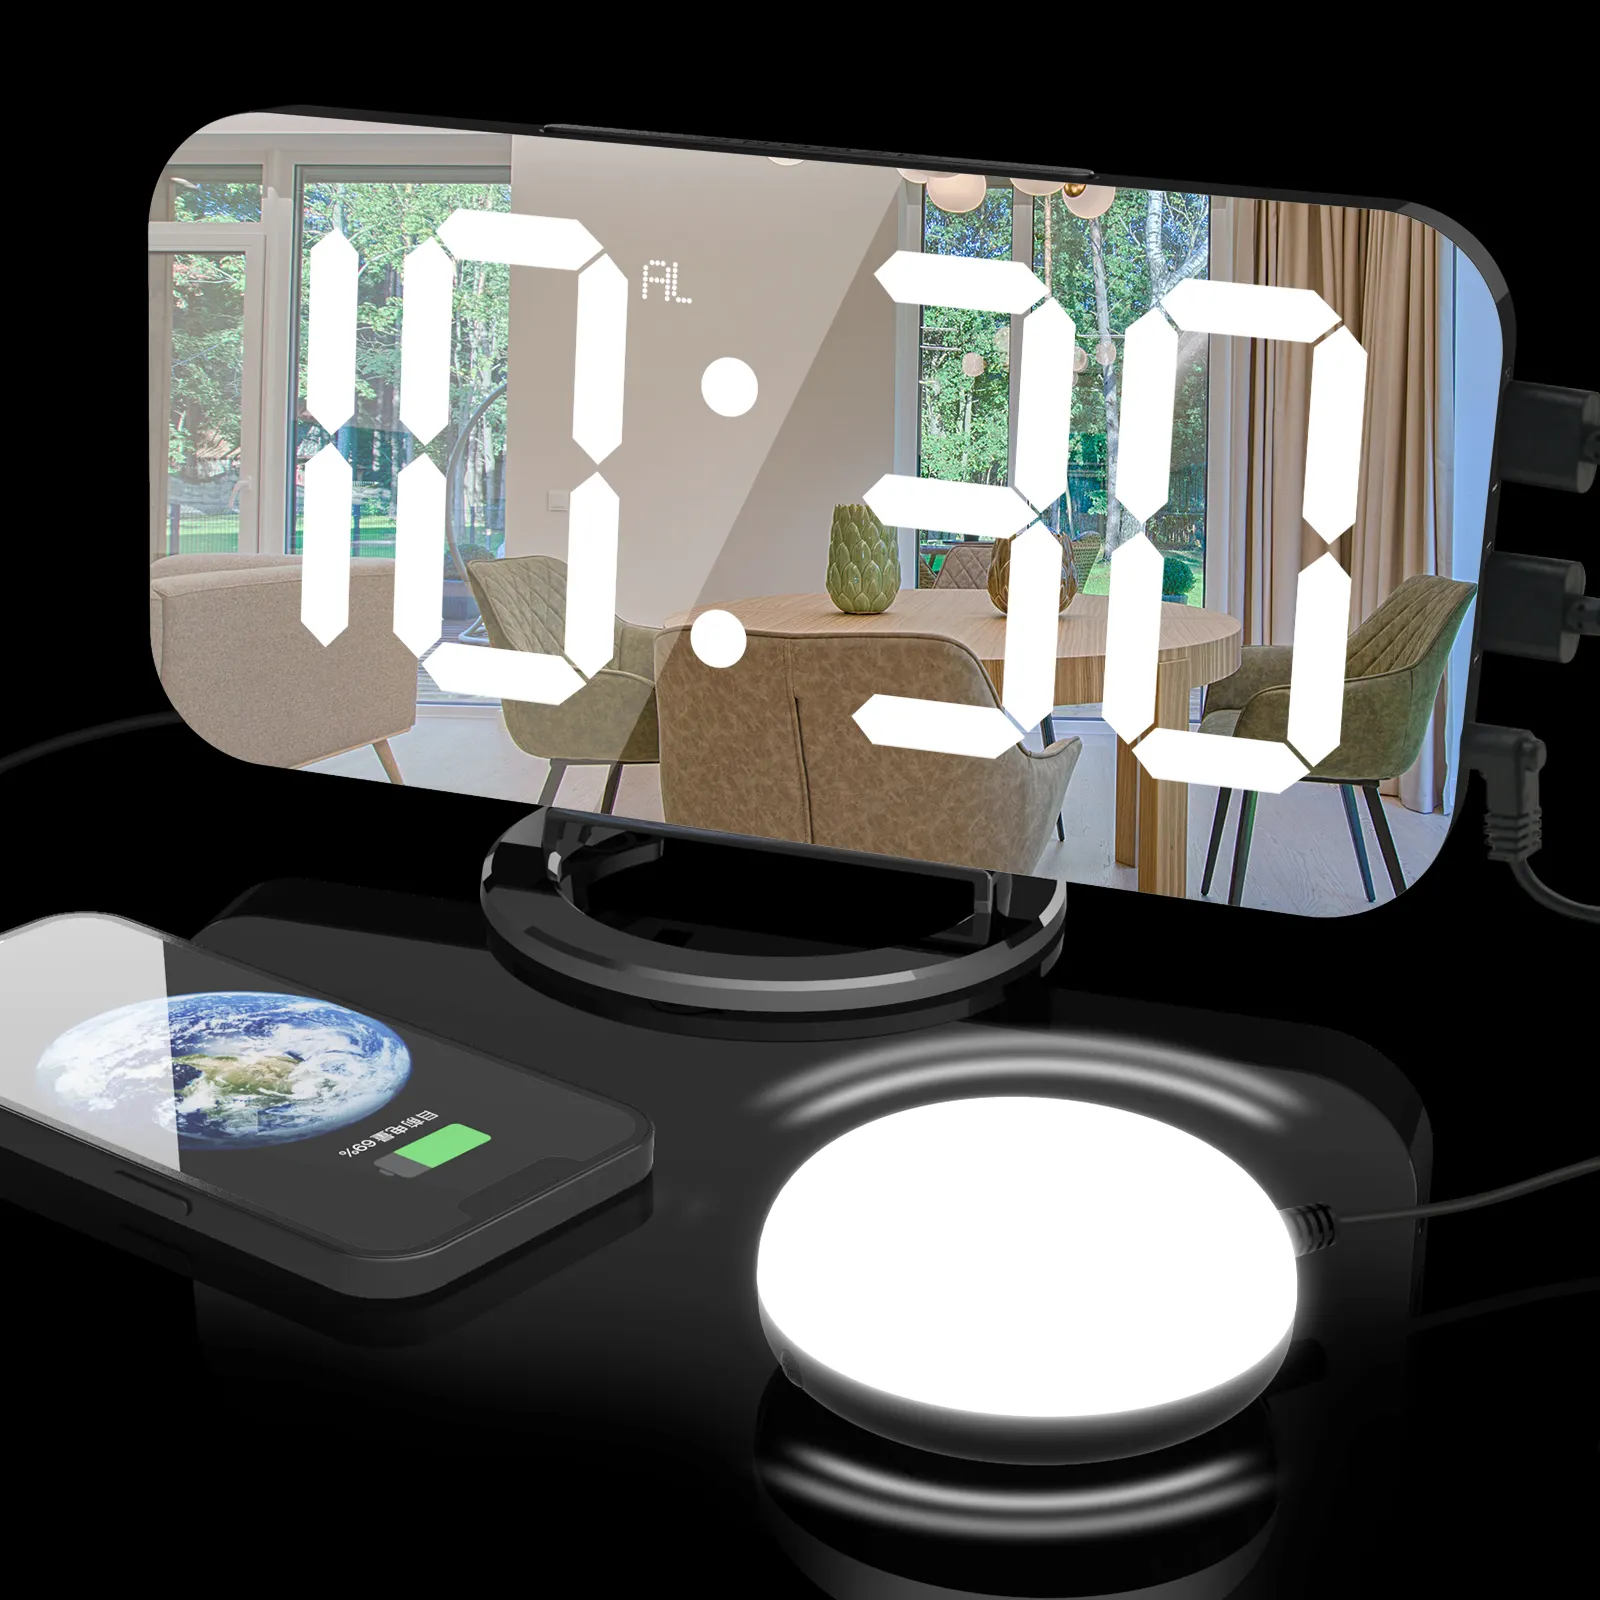 Customized- New Extra Loud Vibrating Alarm Clock with Bed Shaker Digital Clocks Large Display,with Night Light,USB Charger